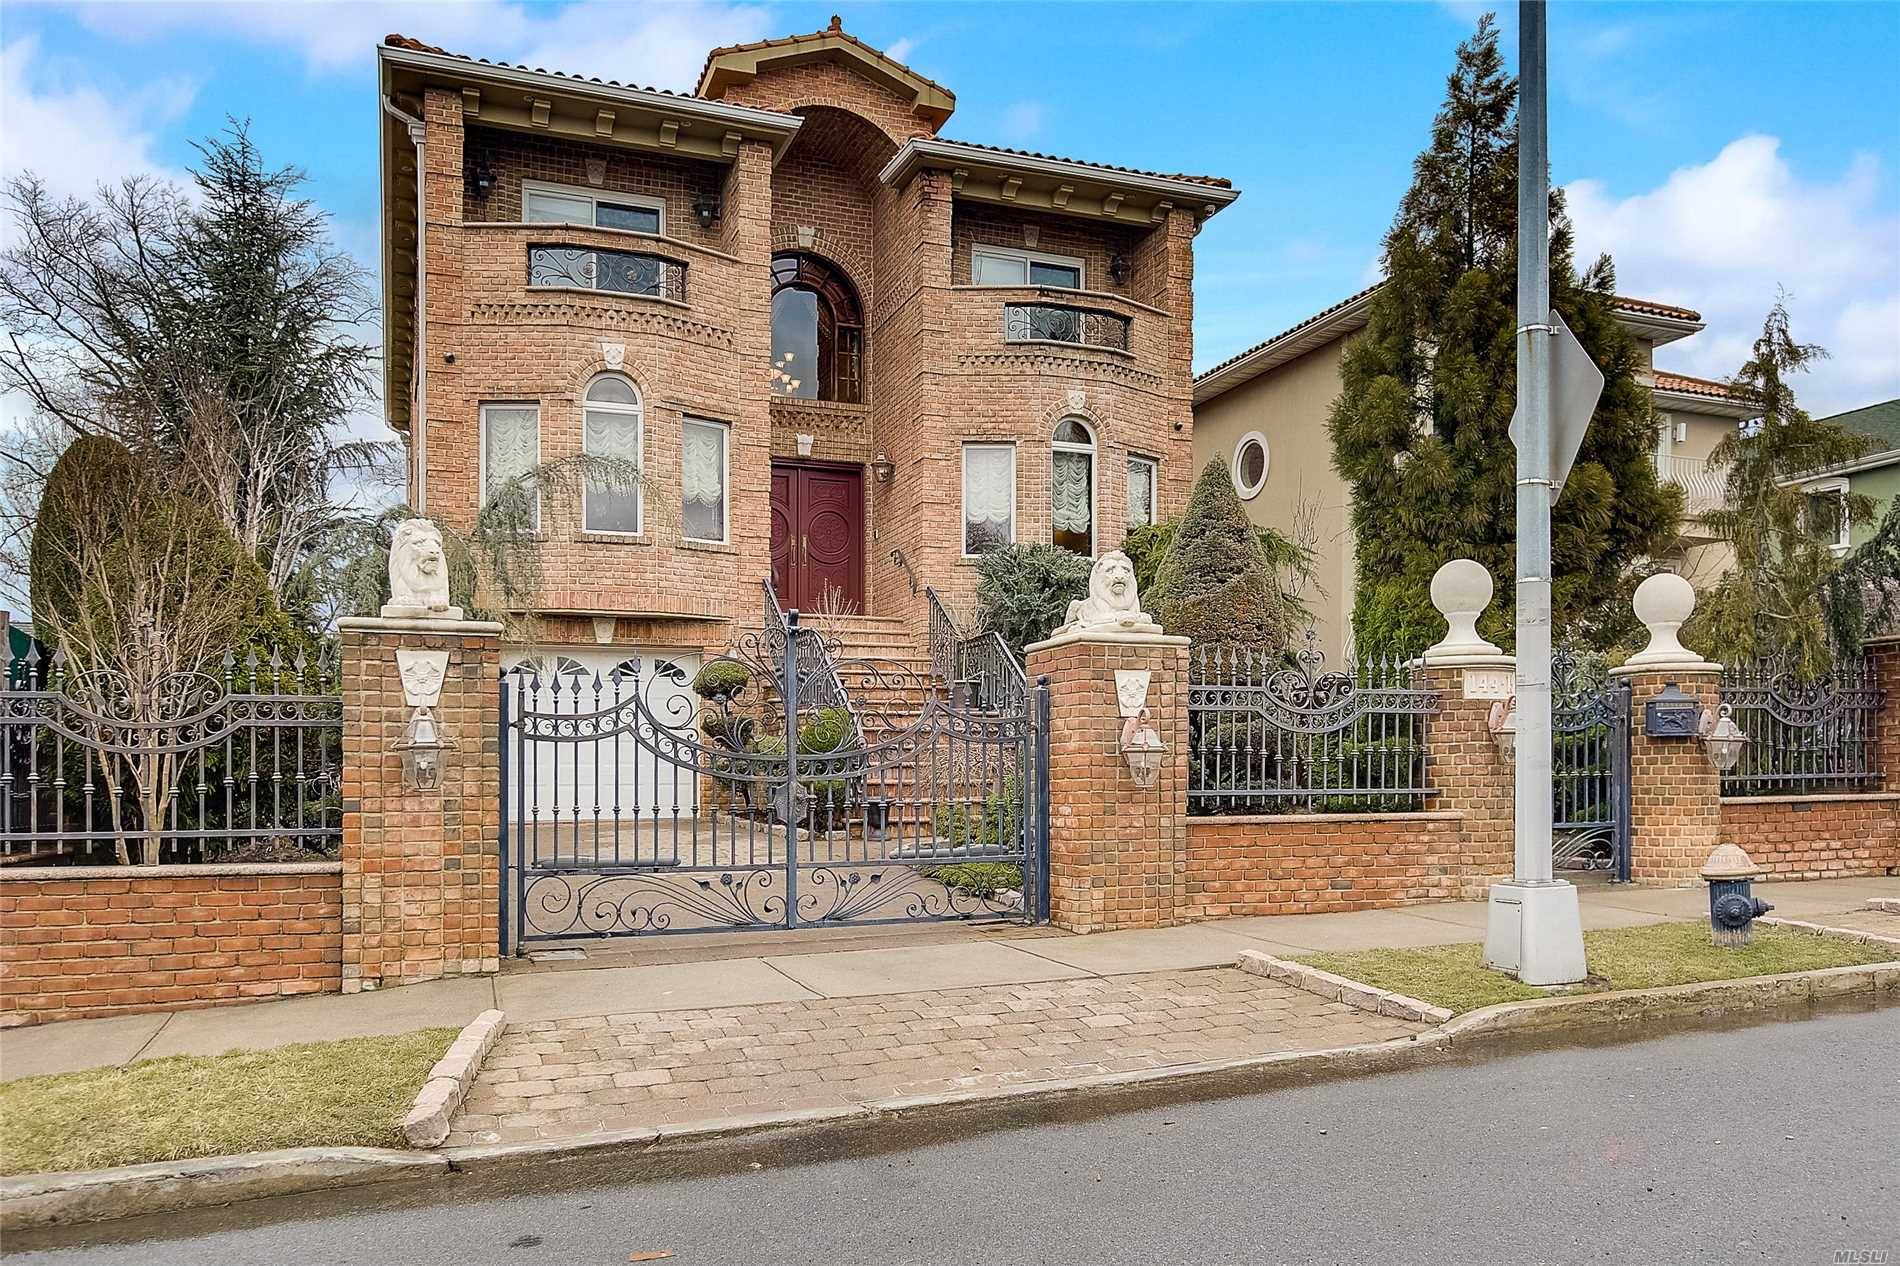 Absolutely Stunning Home On a Dead End Street In The Heart of Malba.